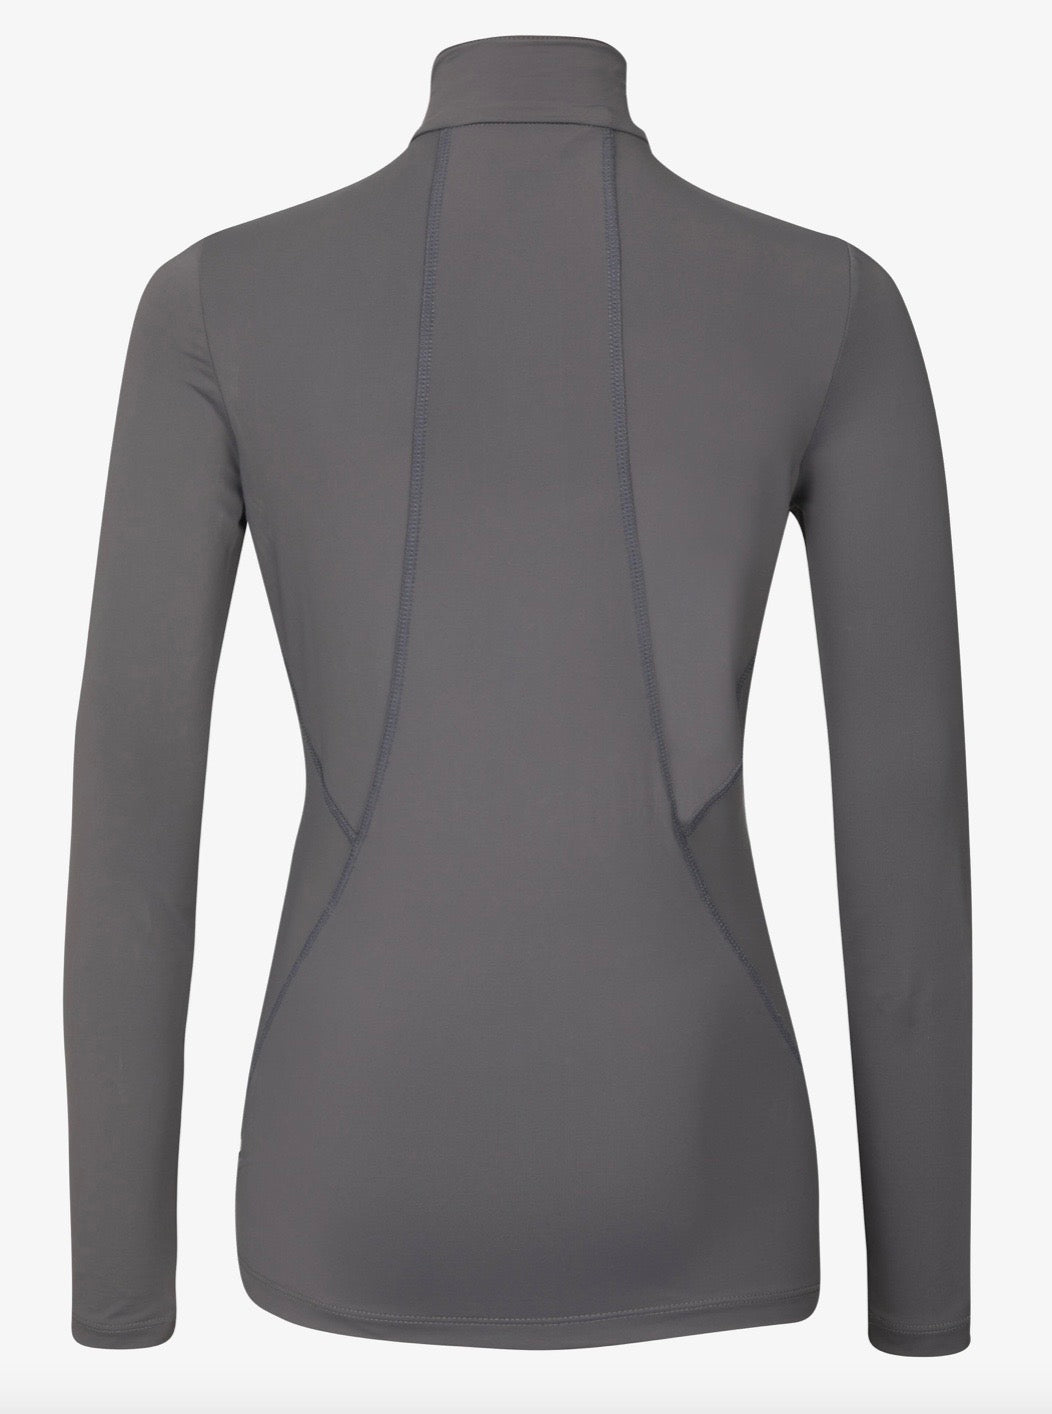 Le Mieux Young Rider Base Layer Slate